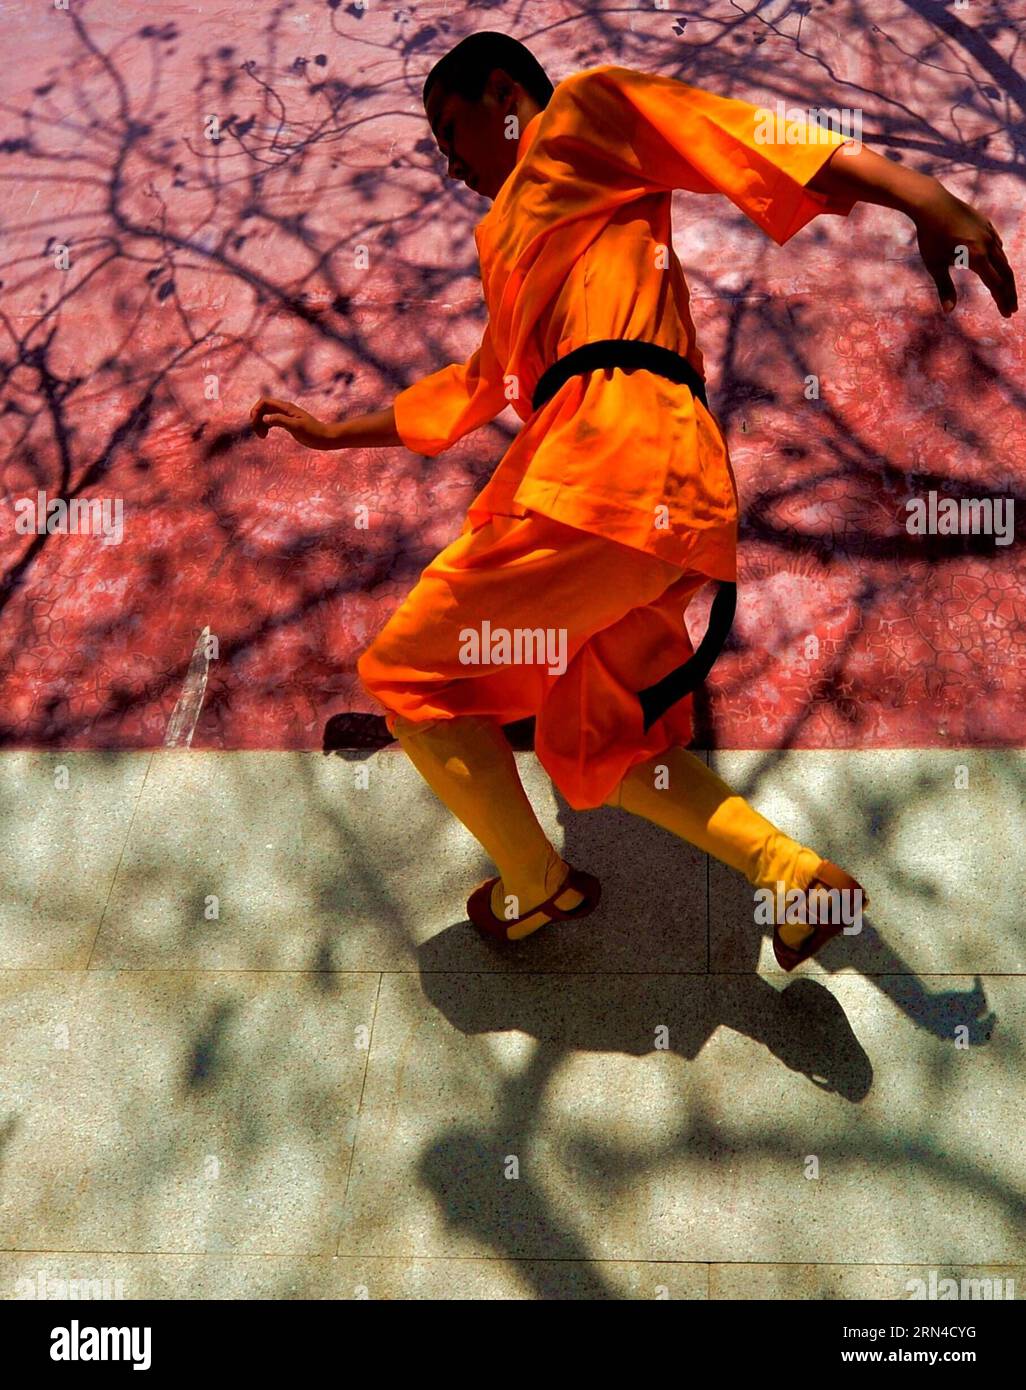 (150517) -- QUANZHOU, May 13, 2015 -- A monk practices martial art at the Quanzhou Shaolin Temple in Quanzhou City, southeast China s Fujian Province, May 13, 2015. Located in the east of the Qingyuan Mountain of Quanzhou, the Quanzhou Shaolin Temple, also called the South Shaolin Temple, is the birthplace of the South Shaolin martial art, which has spread to Taiwan, Hong Kong and Macao and even Southeast Asia since Ming (1368-1644) and Qing (1644-1911) dynasties. It s also jointly called the South and North Shaolin with Songshan Shaolin Temple in central China s Henan Province. Zen, the doctr Stock Photo